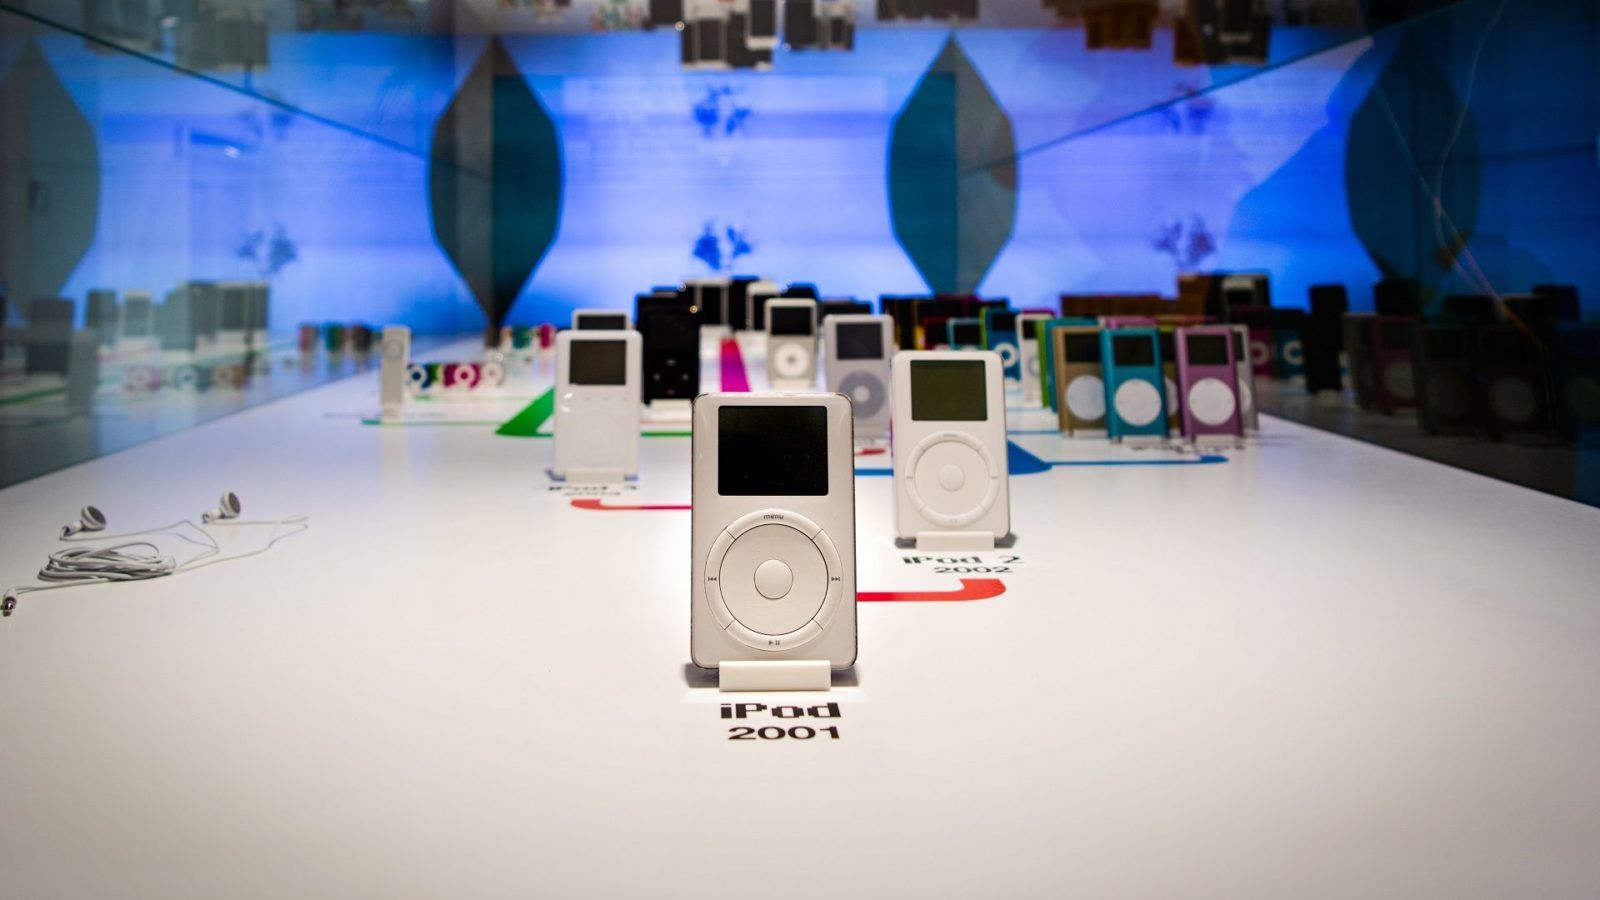 Apple announces discontinuation of the iconic iPod after 21 years